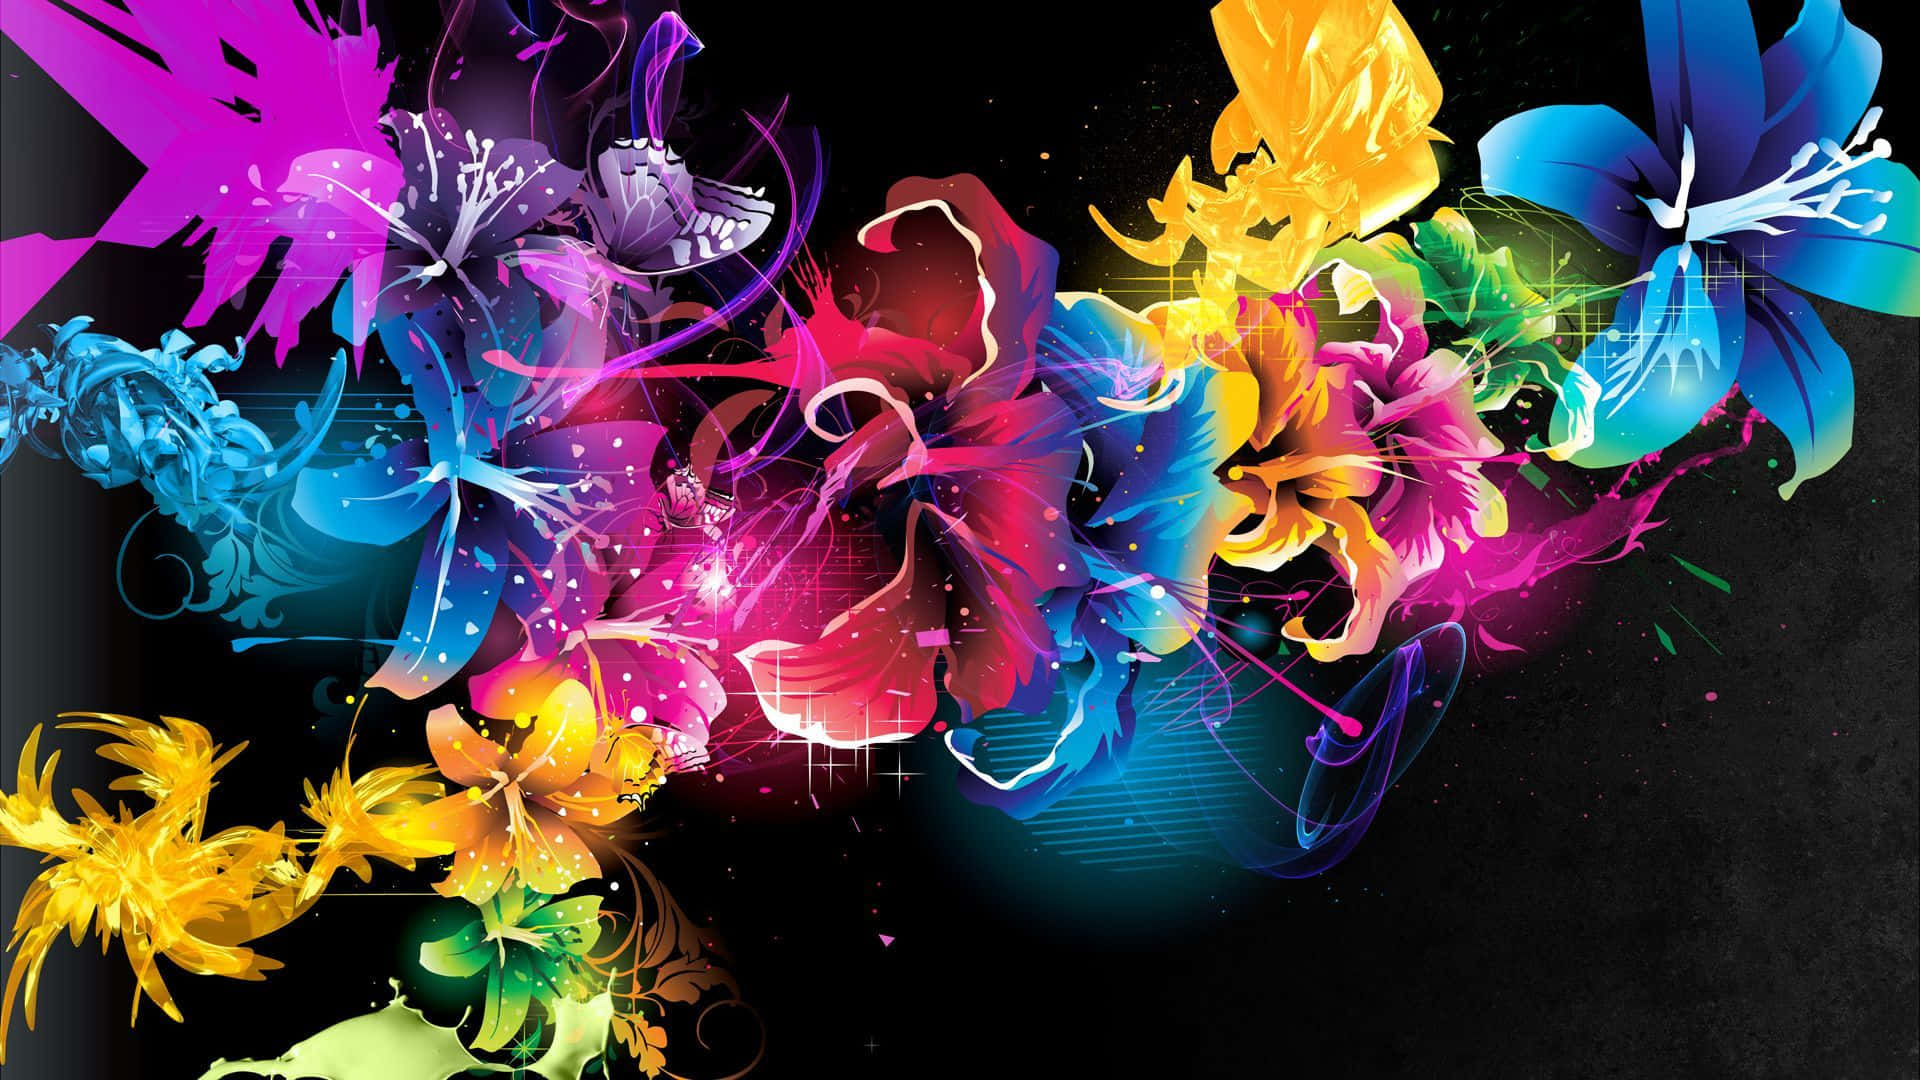 An infusion of Vibrant Blossoms - Exquisite Flower Art Wallpaper